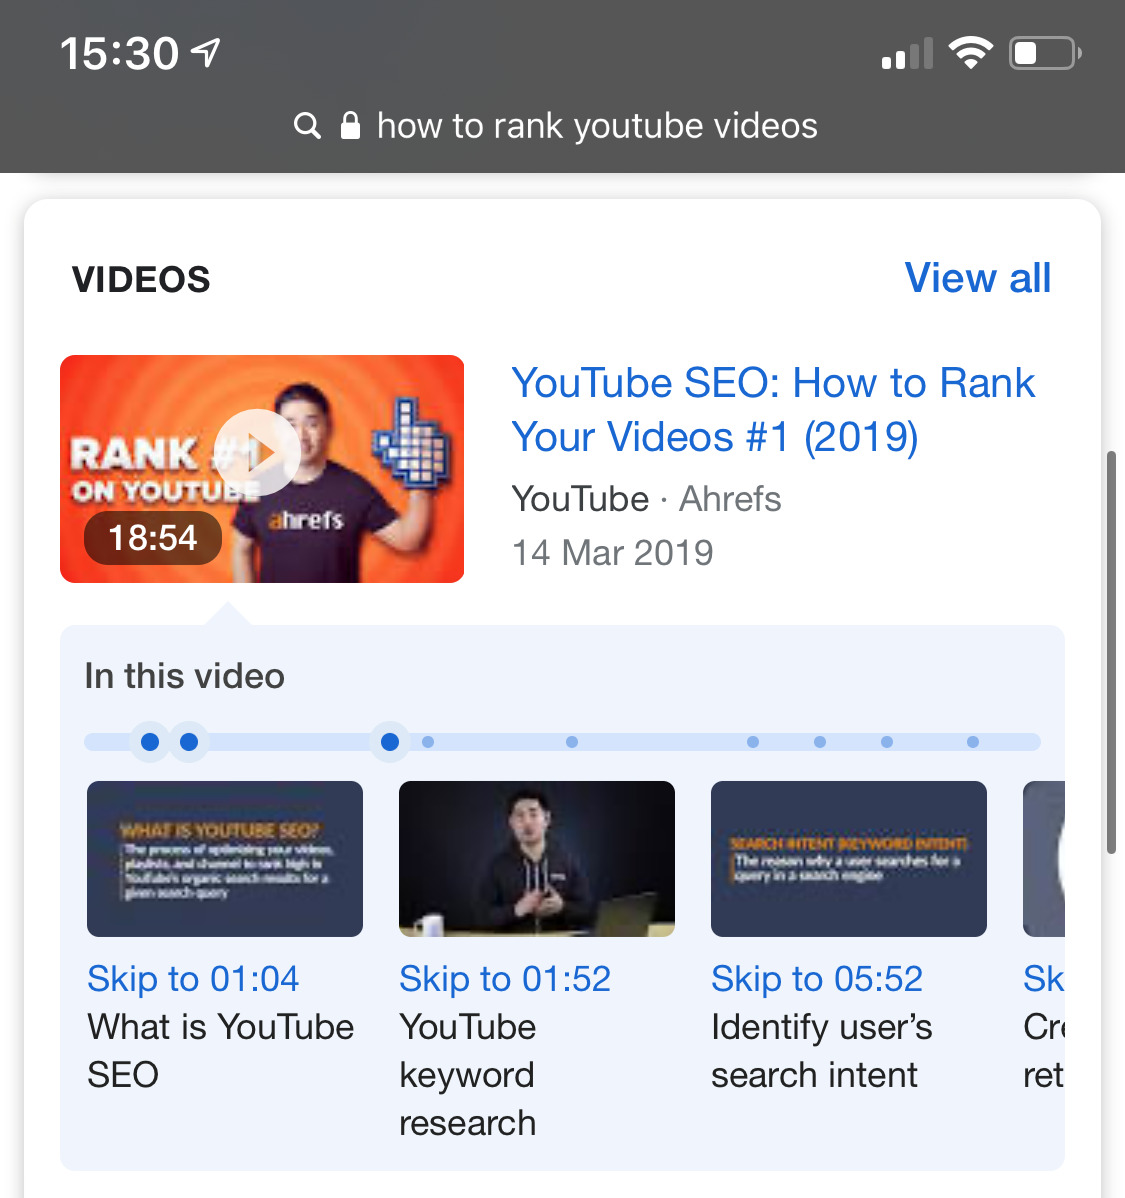 how to rank youtube videos timestamps 1